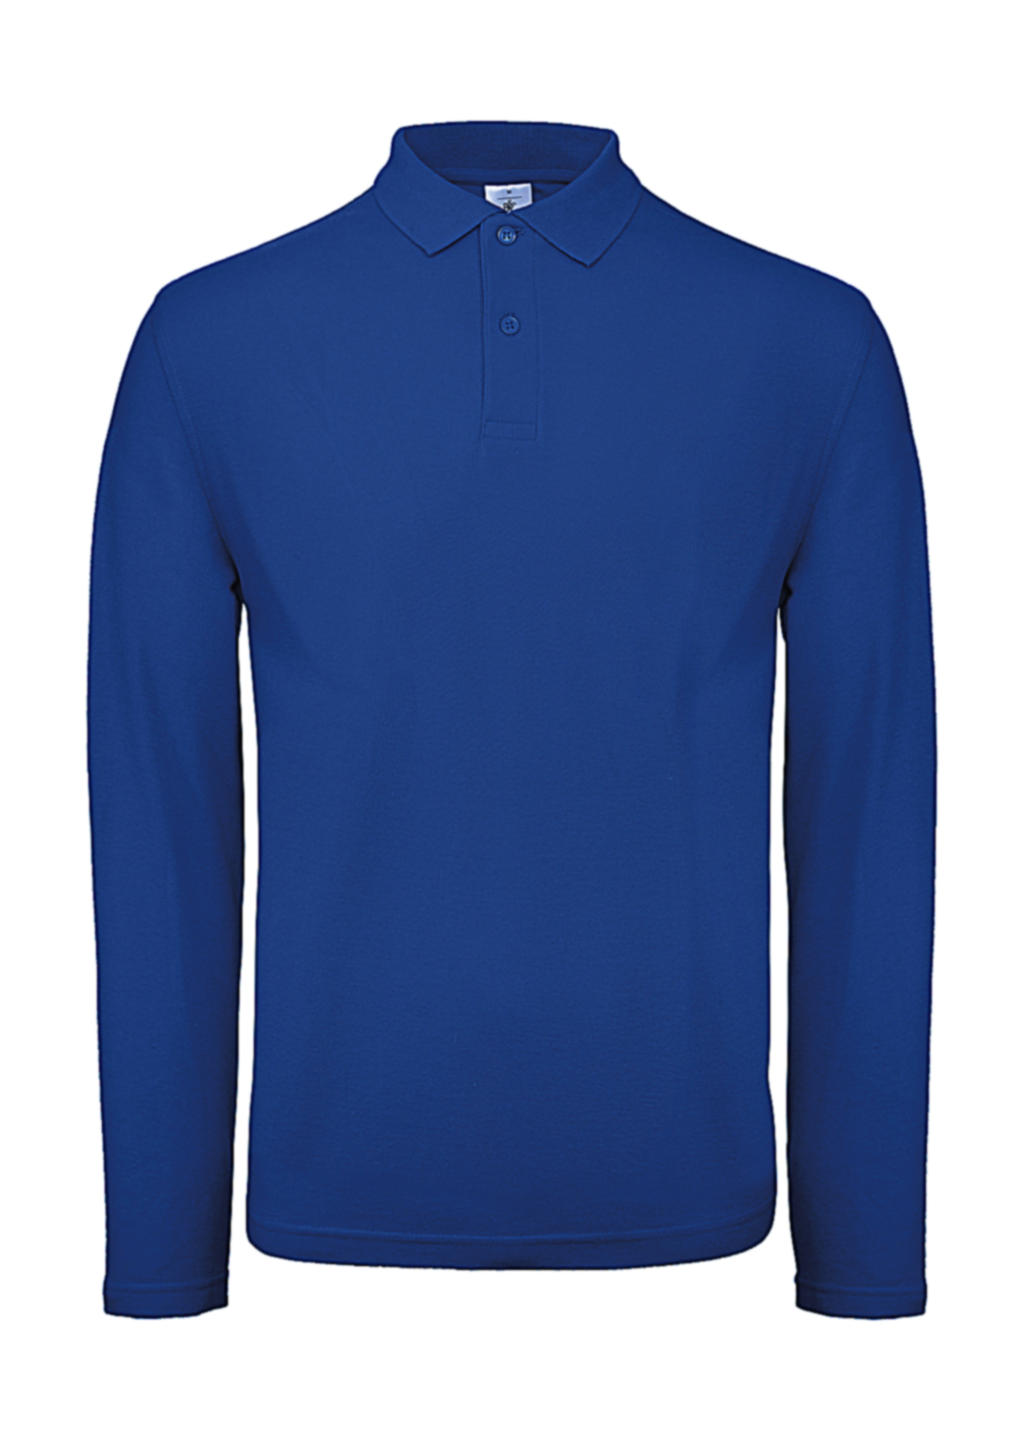  ID.001 LSL Polo in Farbe Royal Blue